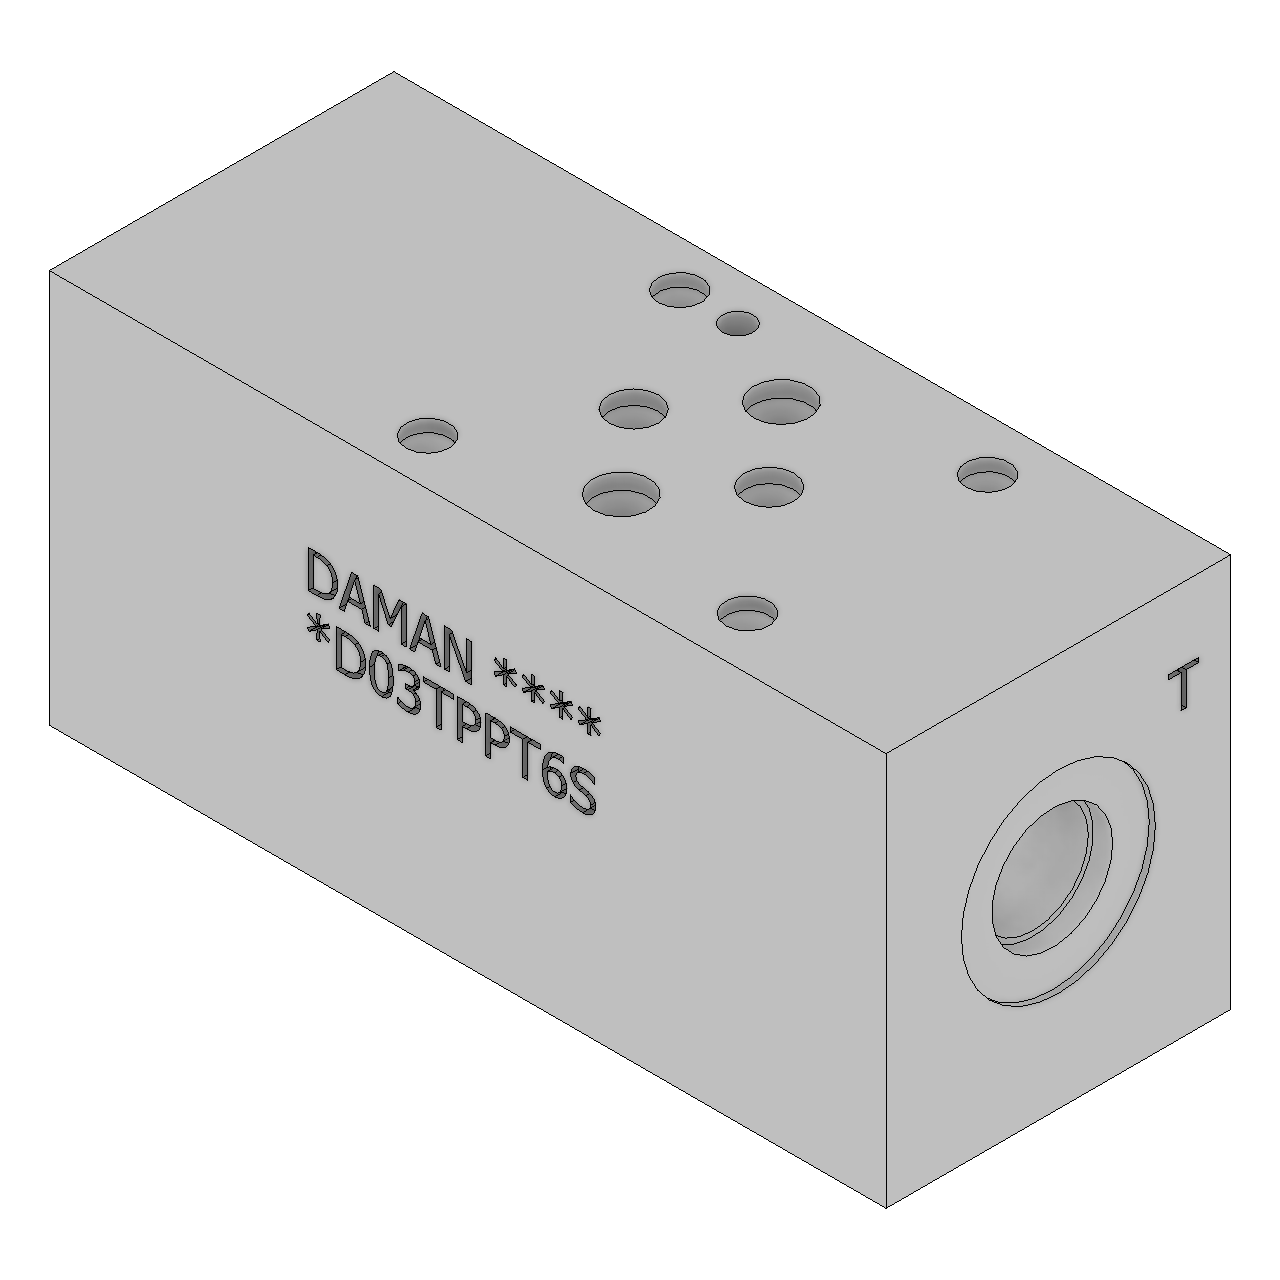 DD03TPPT6S - Tapping Plates